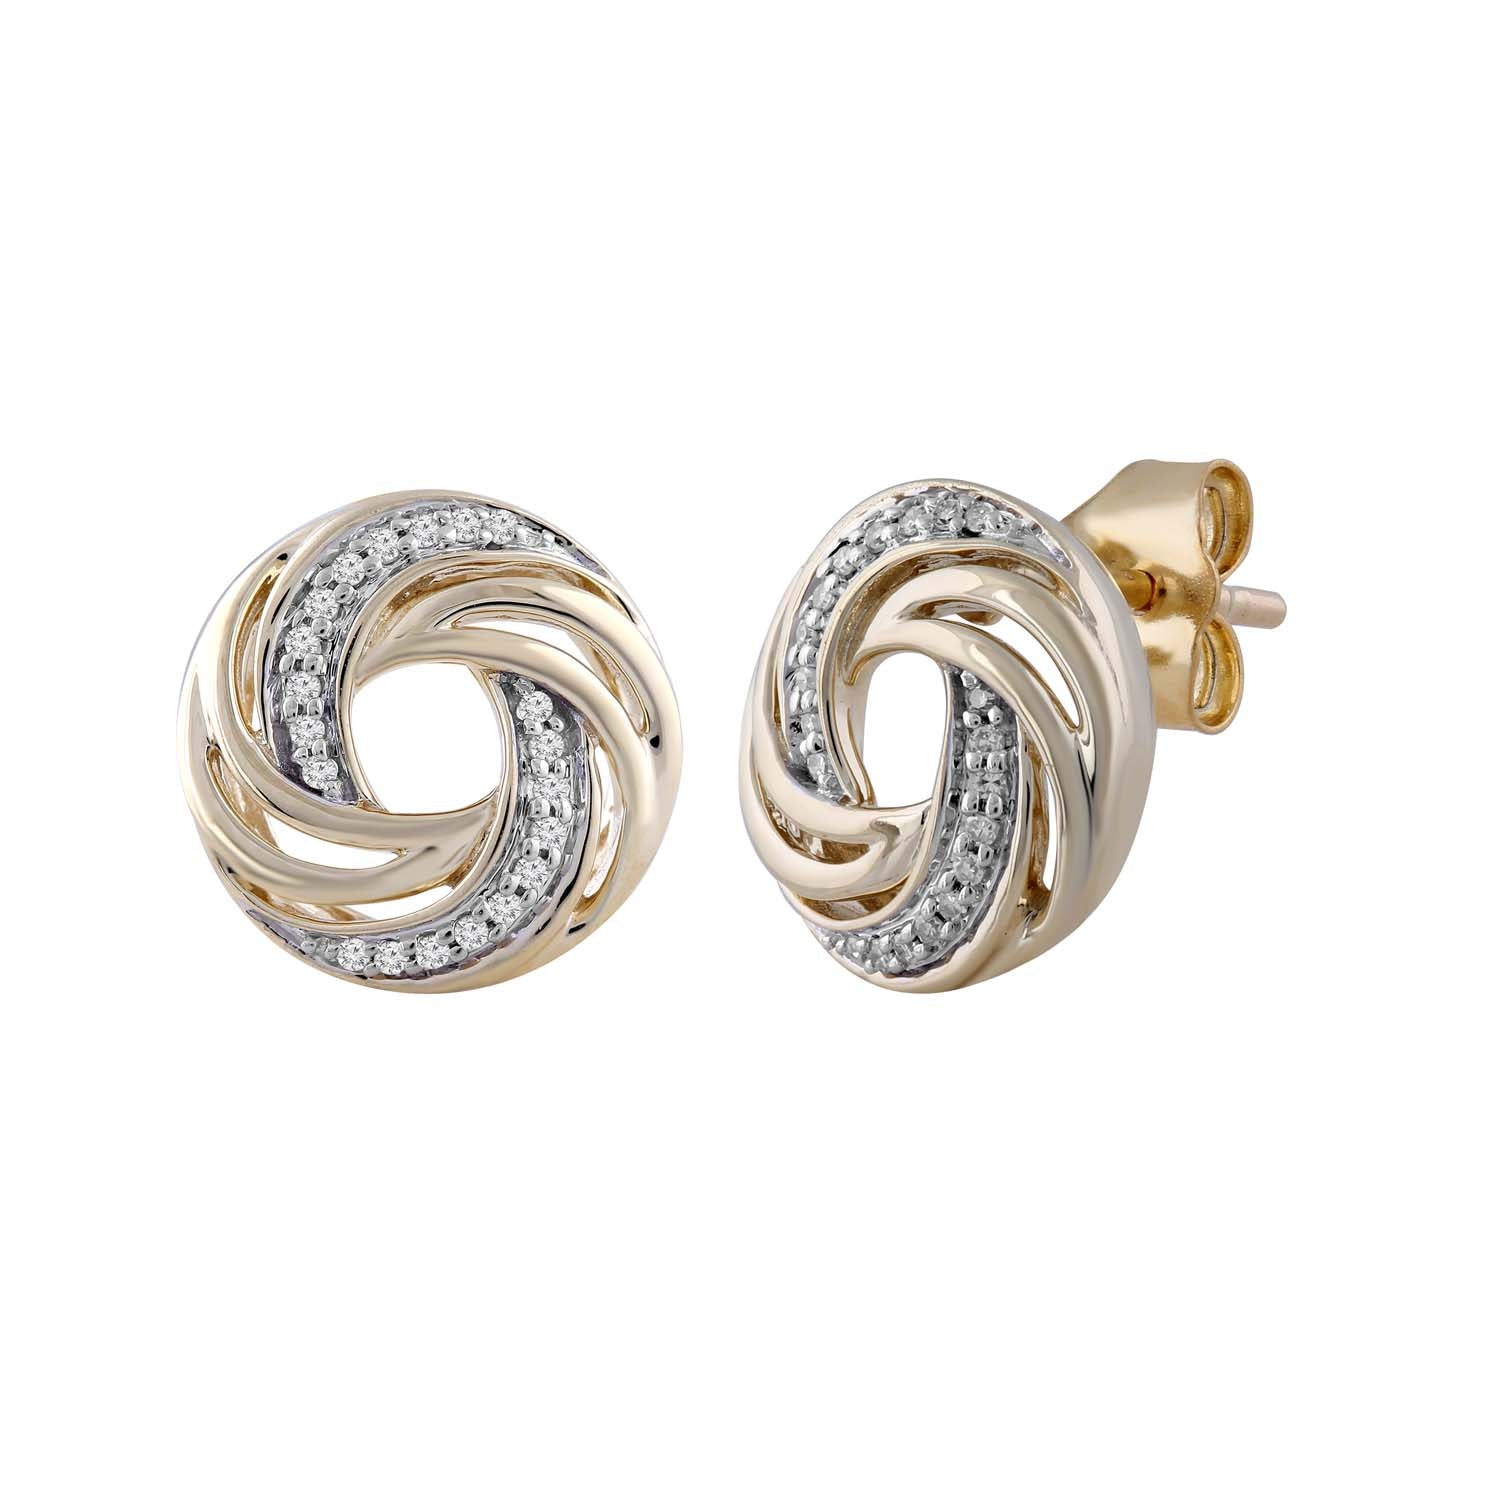 Earrings with 0.07ct Diamond in 9K Yellow Gold